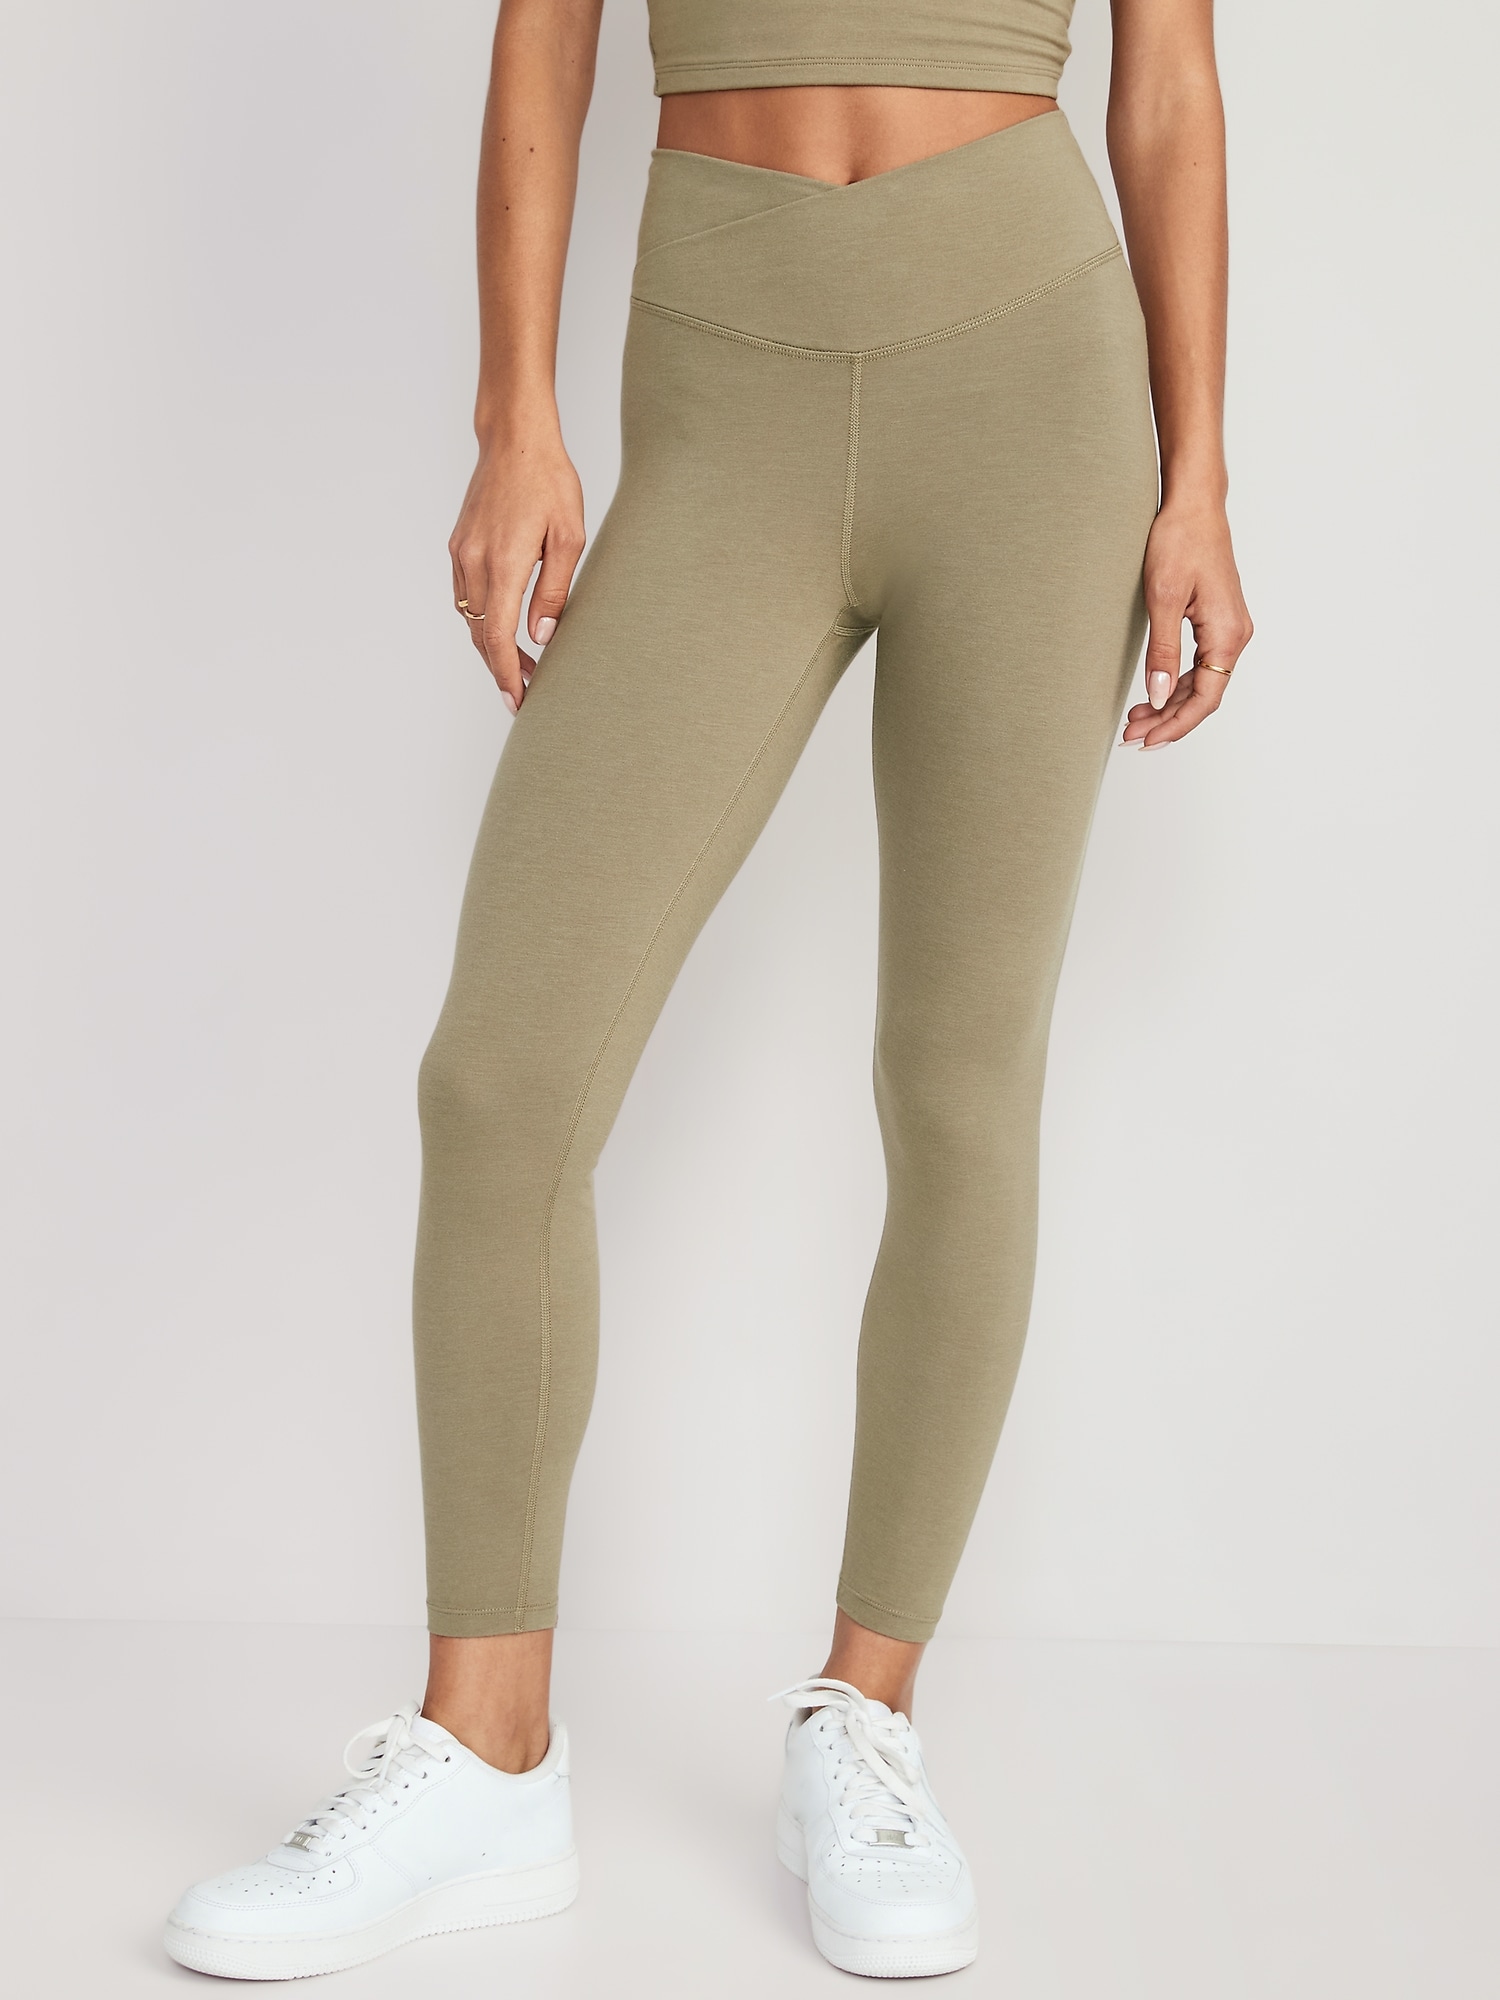 Extra High-Waisted PowerChill Two-Tone Compression Leggings